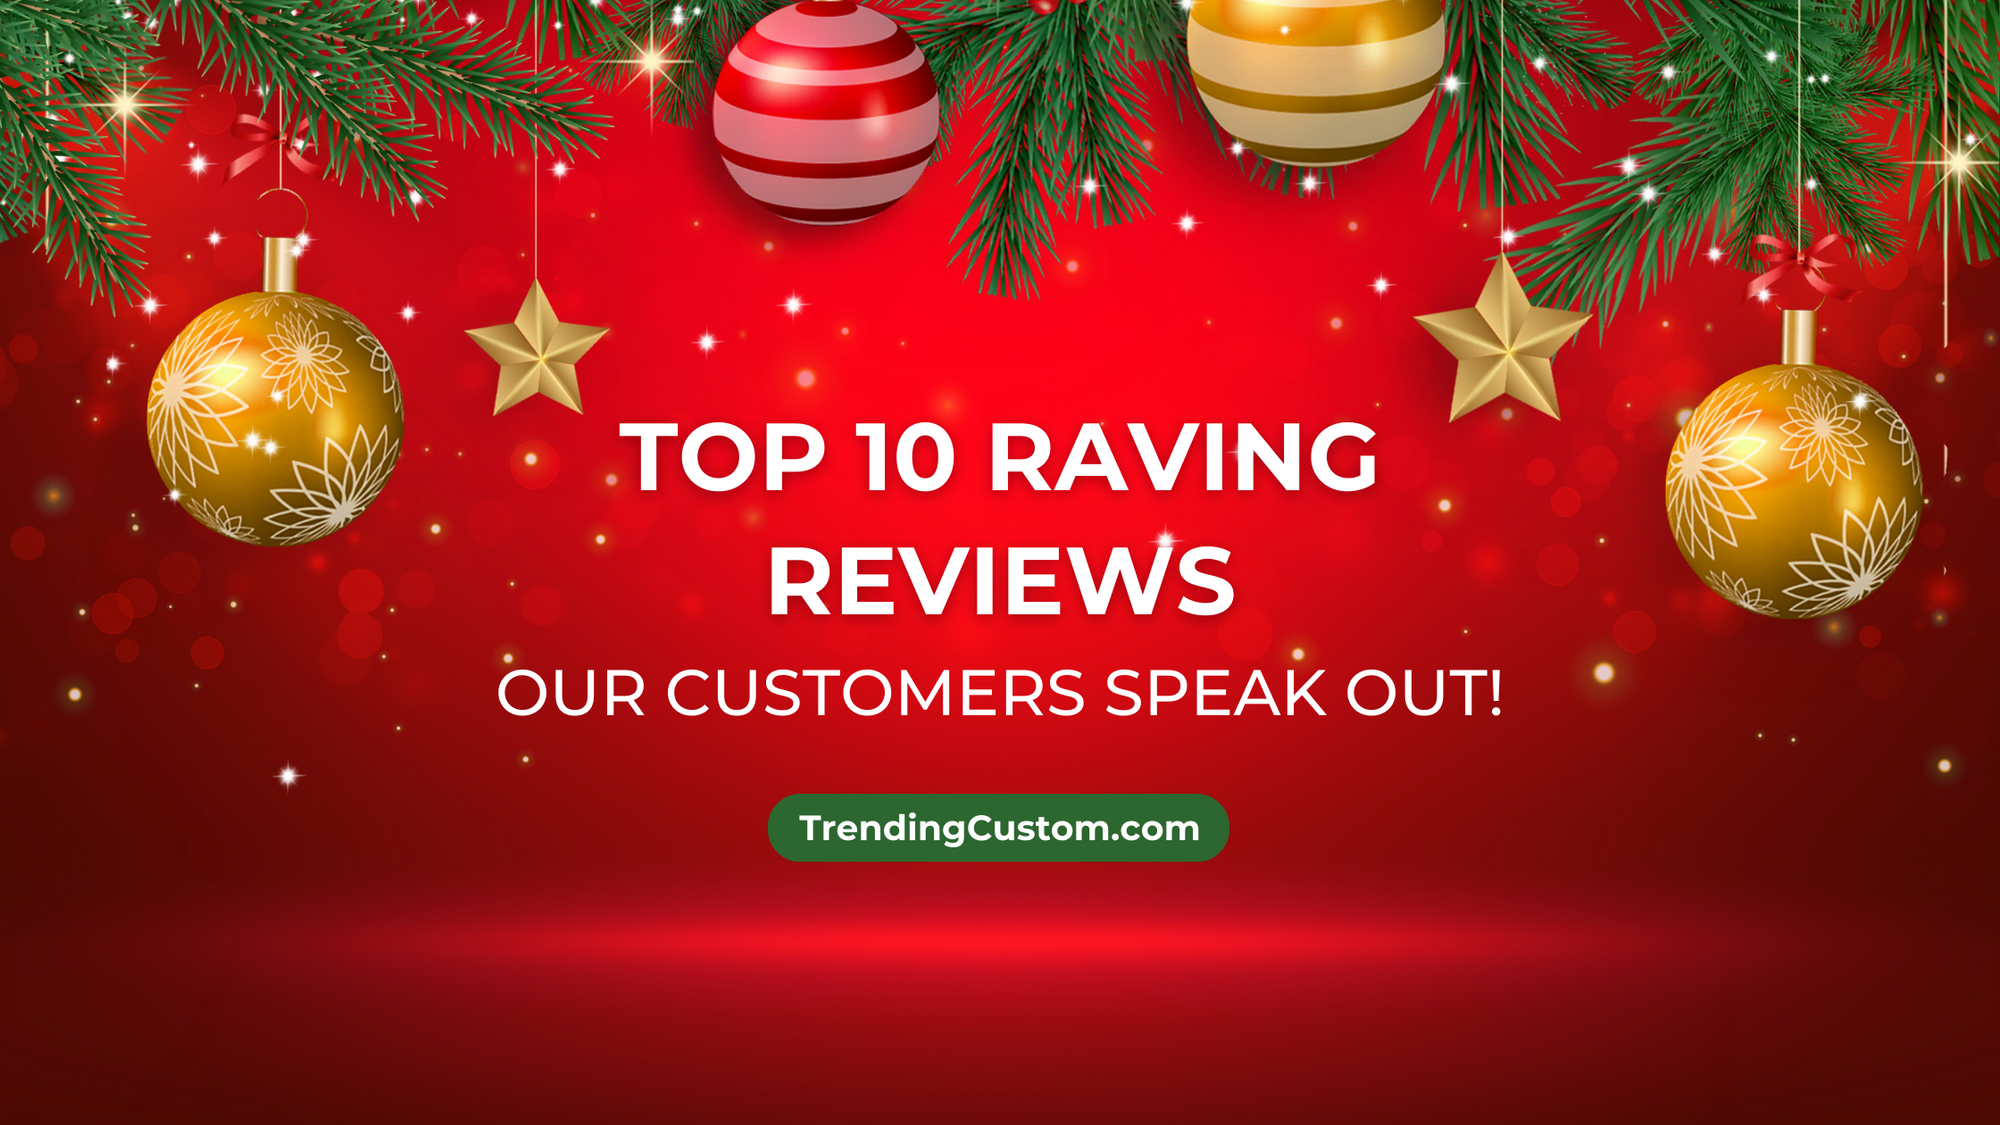 Top 10 Raving Reviews: Our Customers Speak Out! - November 5th